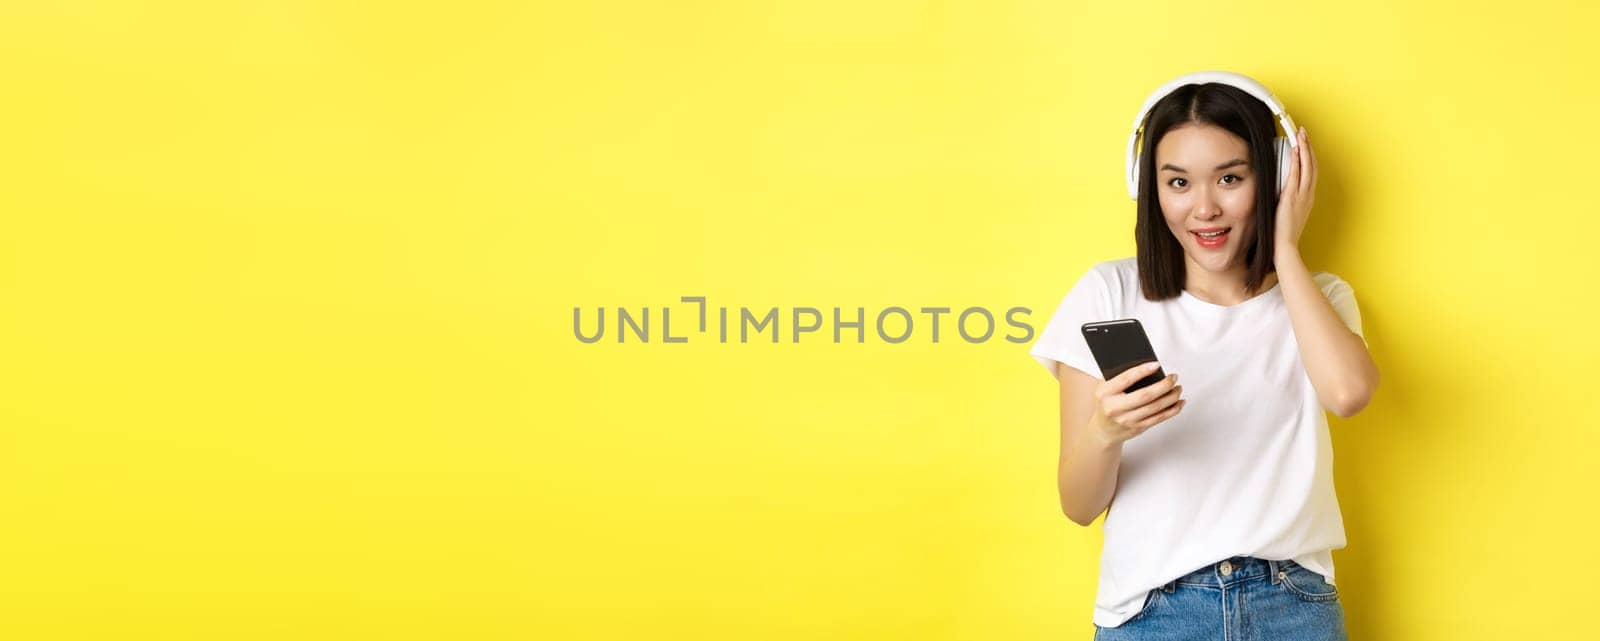 Modern asian woman listening music in wireless headphones, reading smartphone screen and smiling, standing in white t-shirt over yellow background.